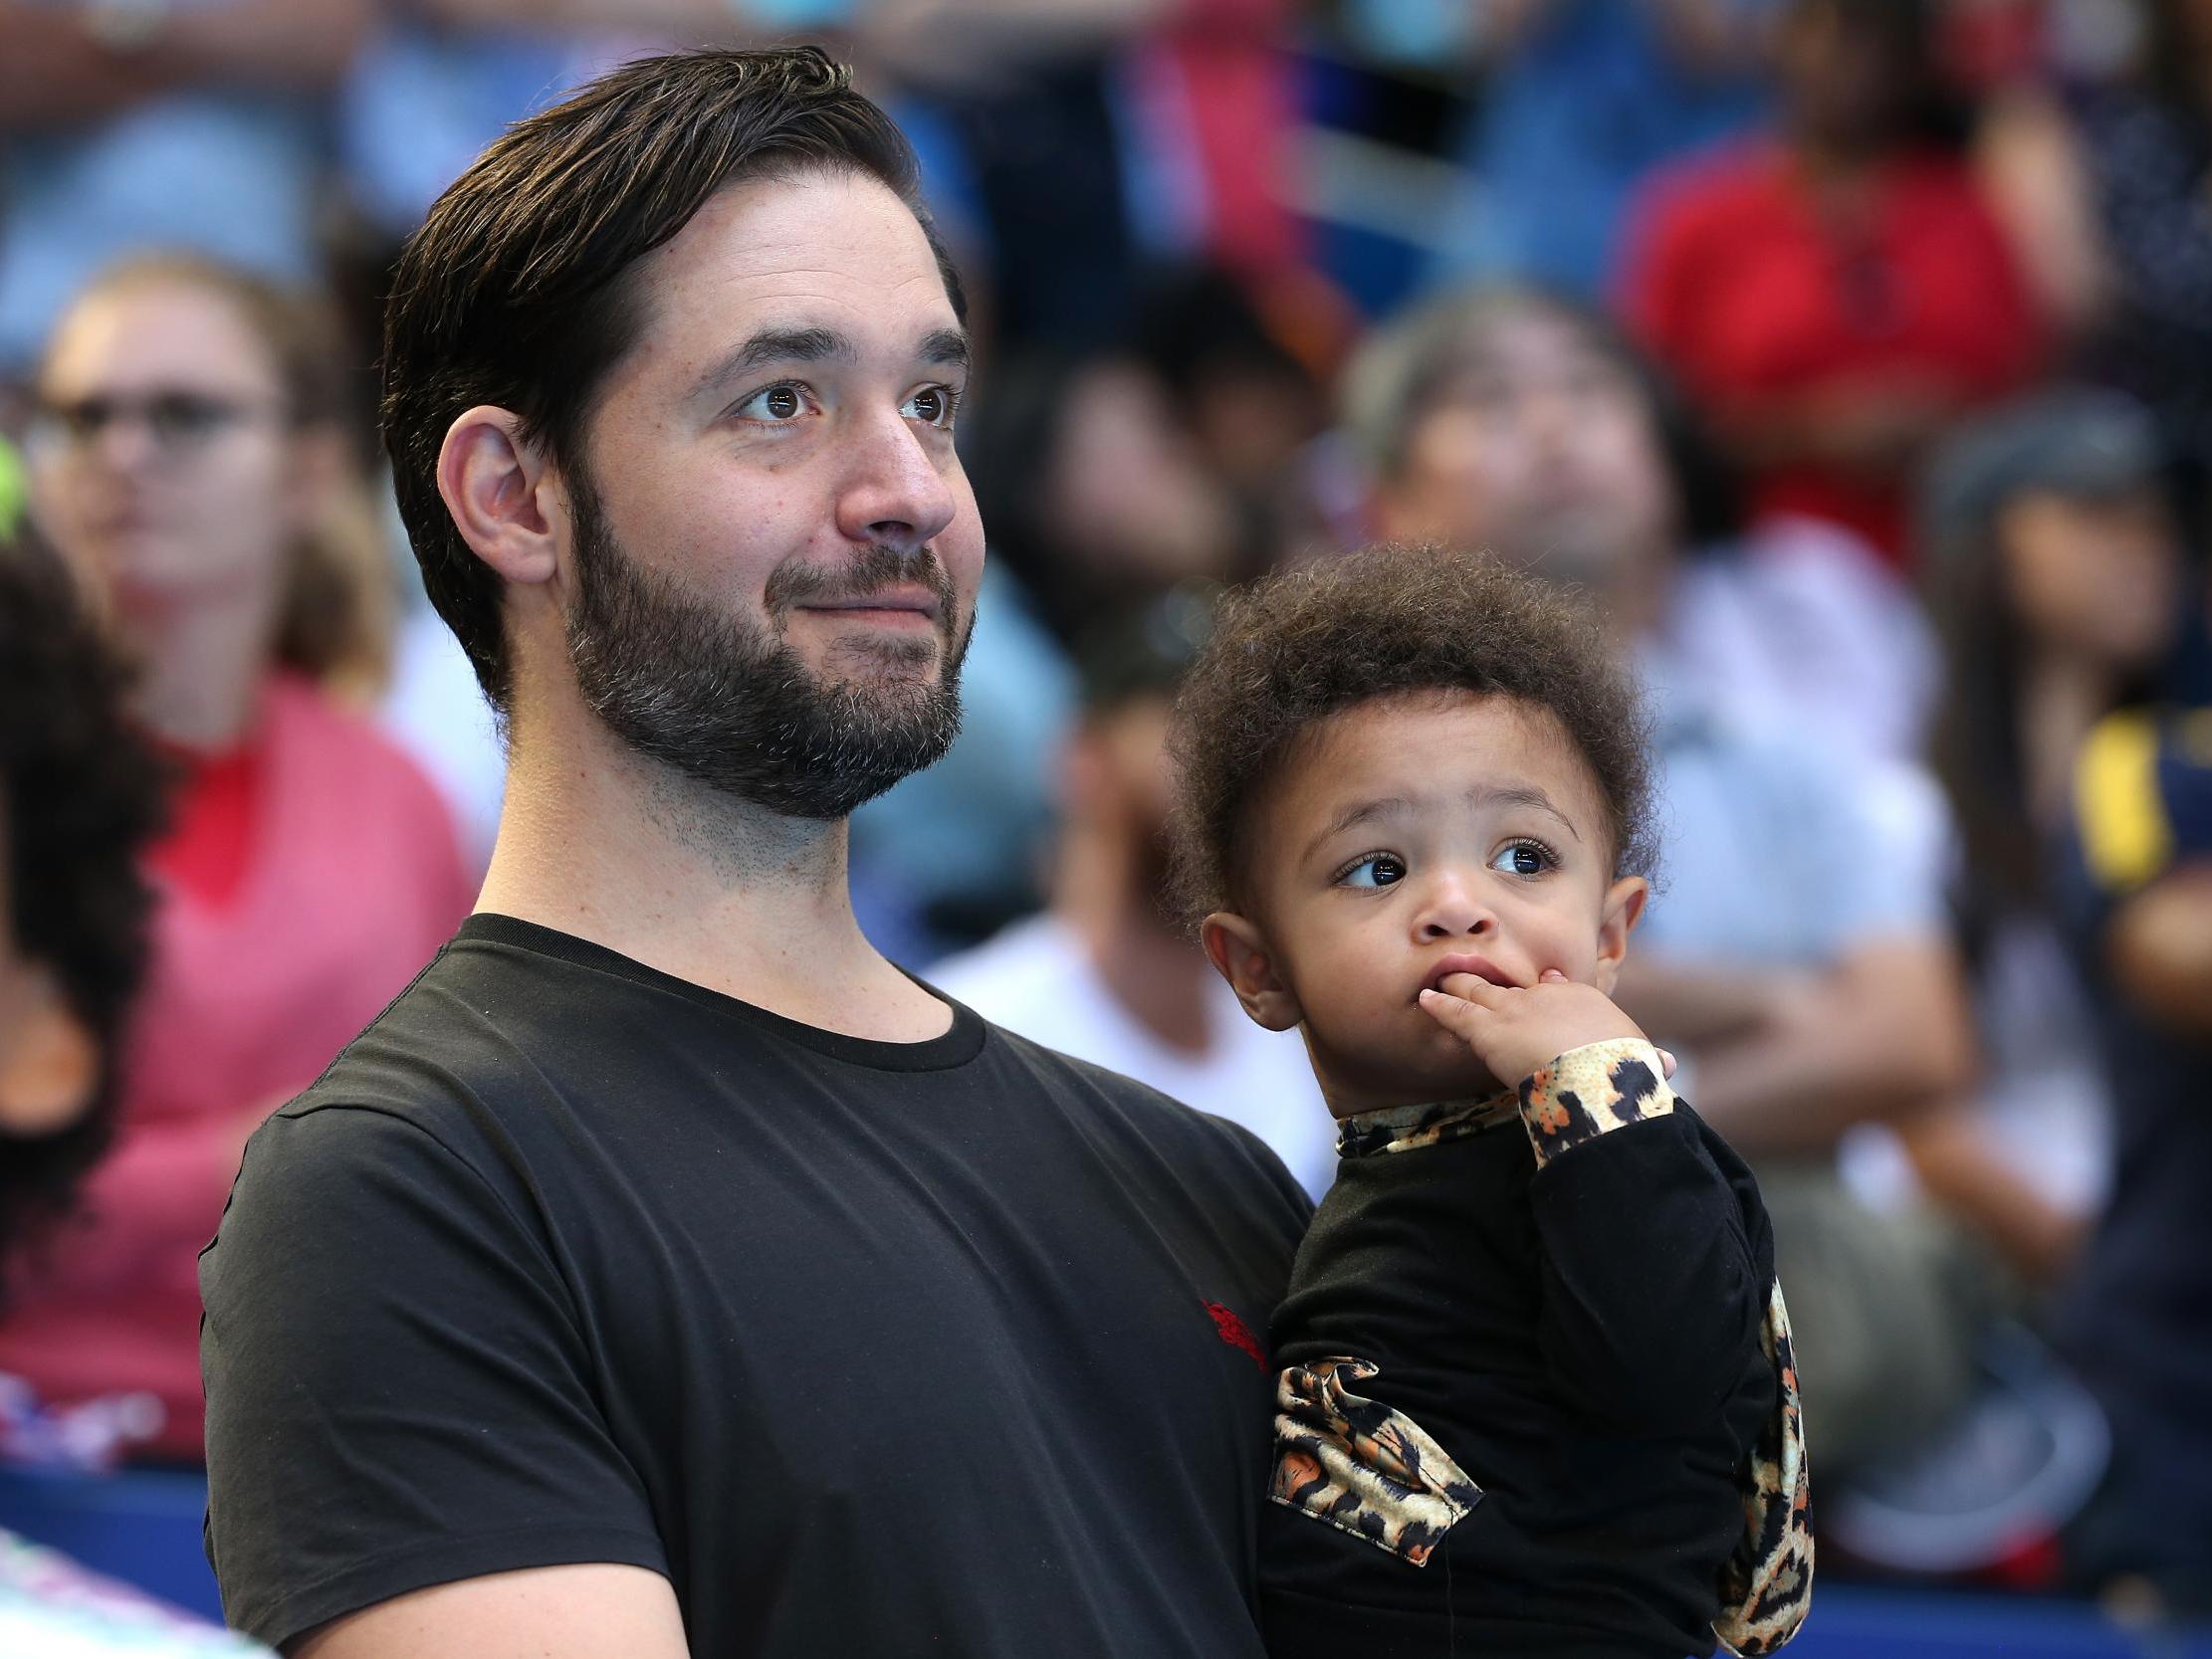 Alexis Olympia and Alexis Ohanian